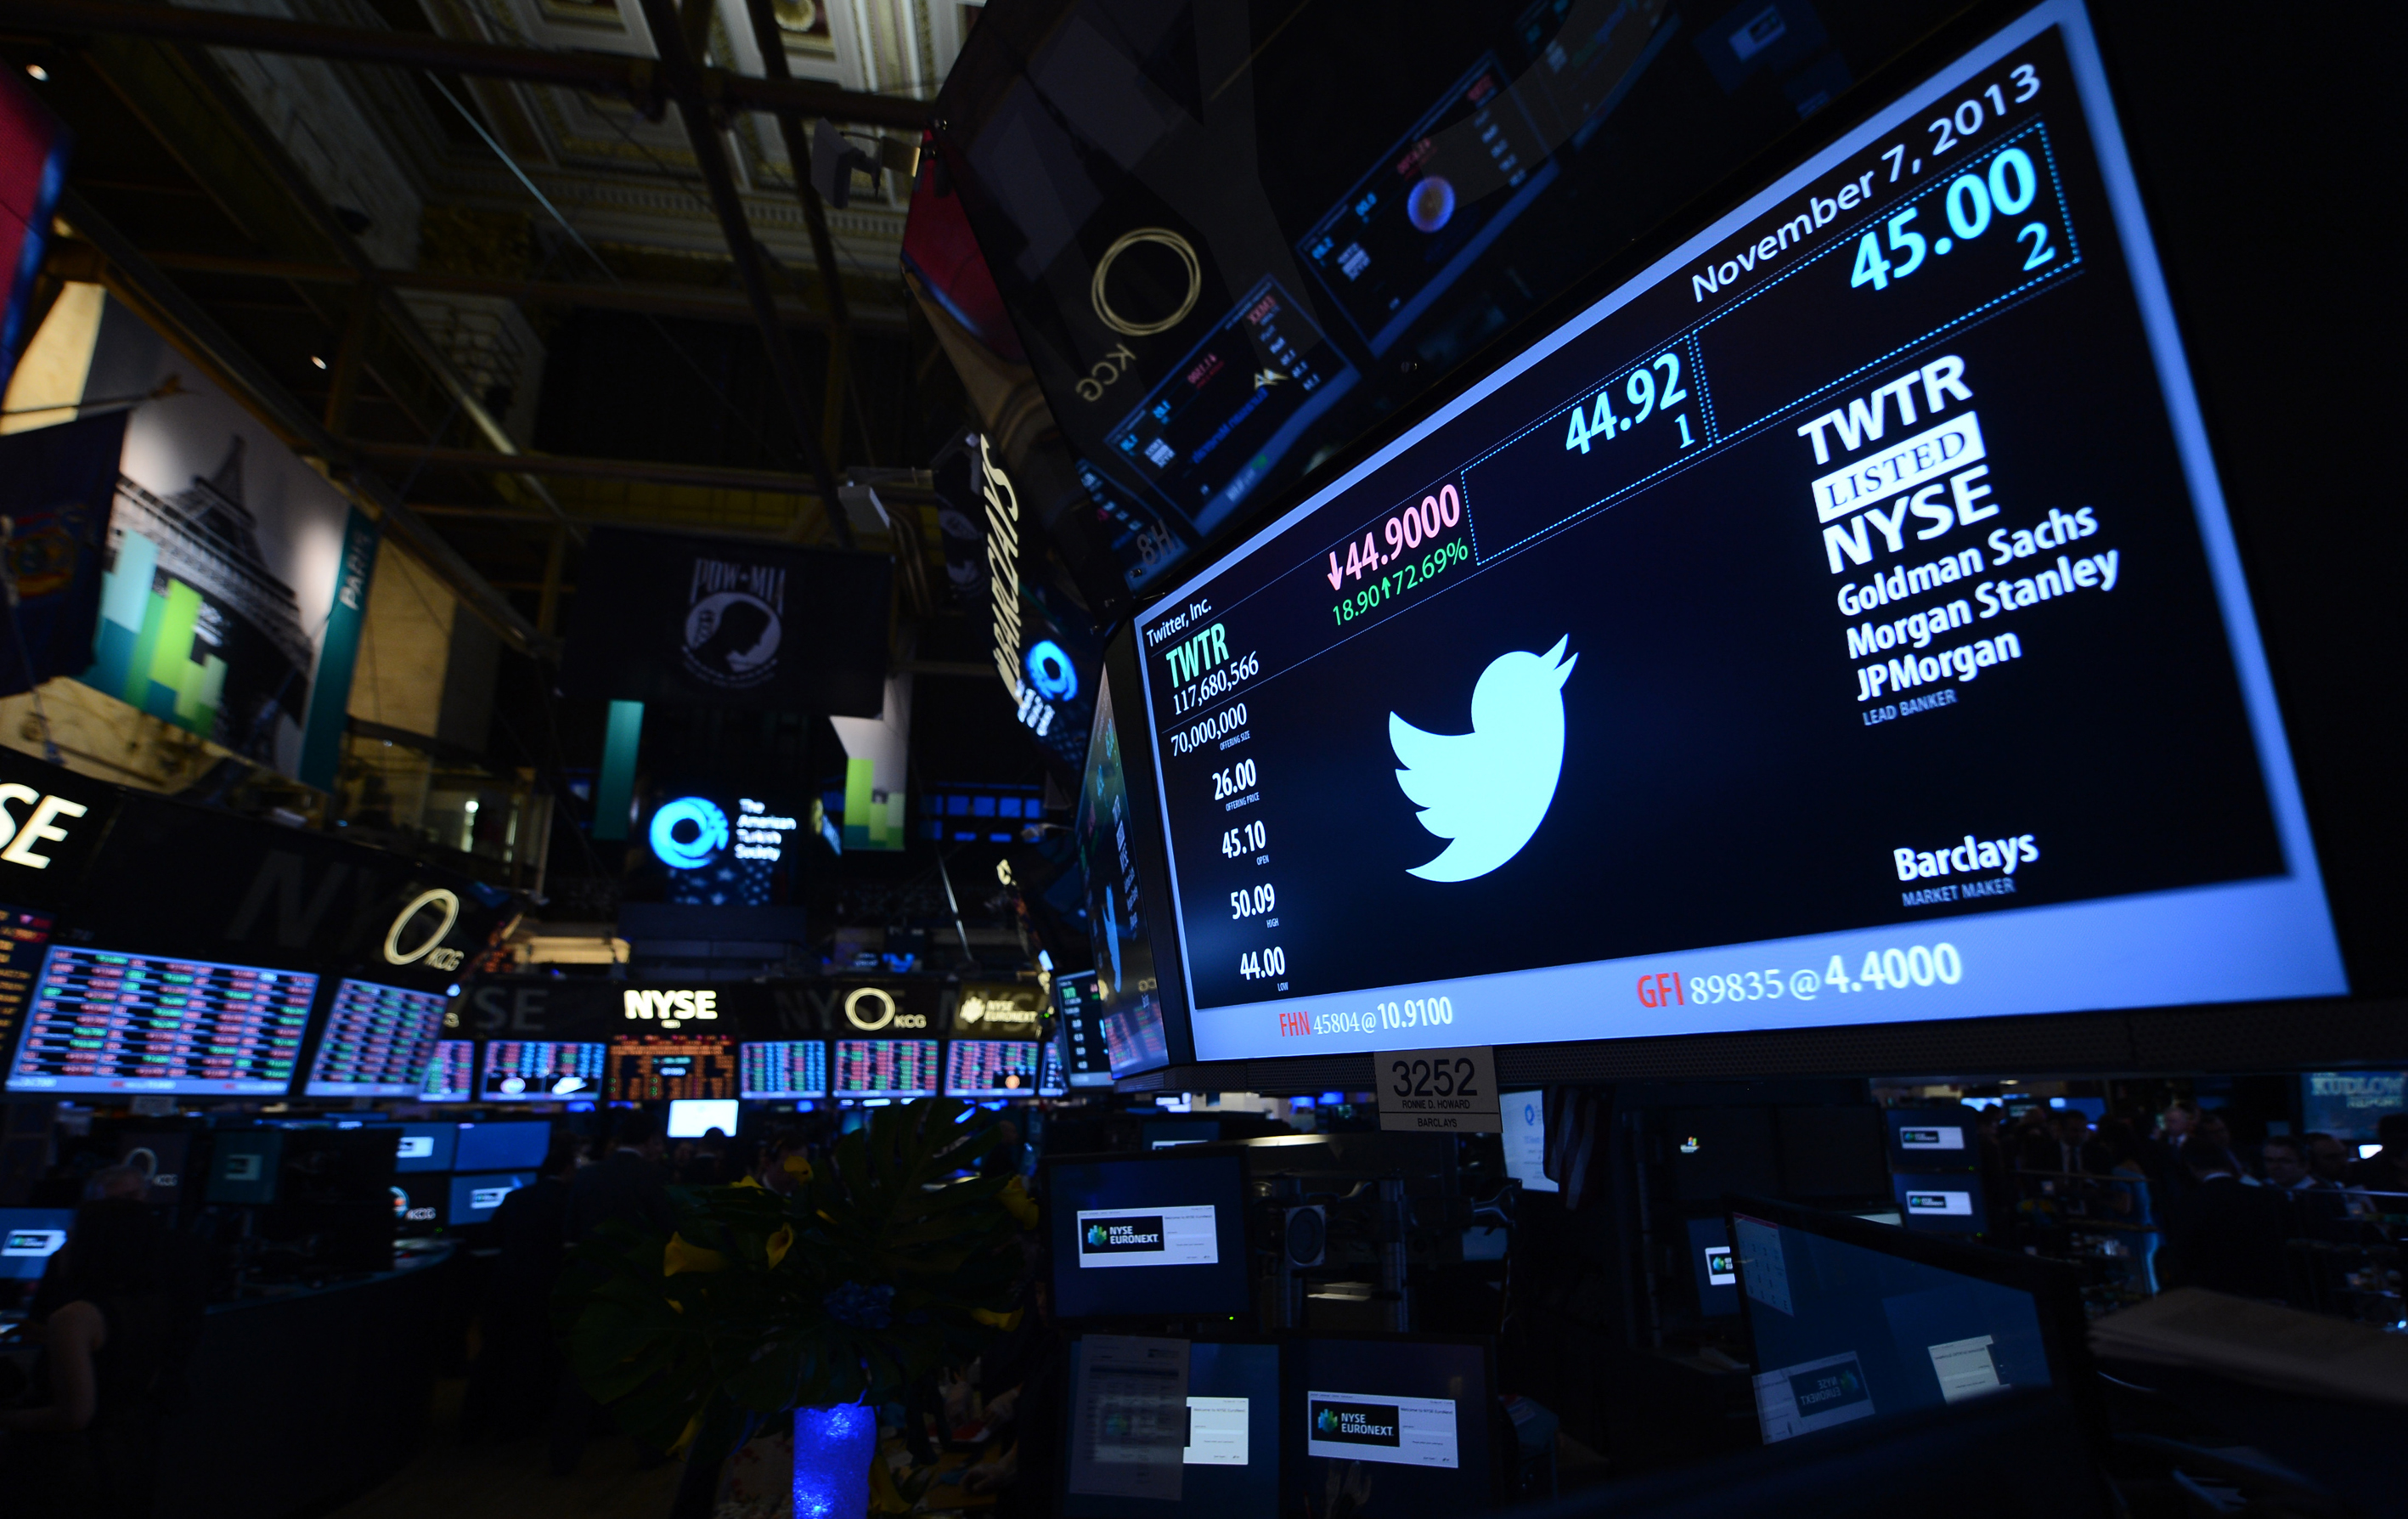 Twitter shares have closed at $44.90 a share on its first day of trading, 73 percent above its initial offering price on November 7, 2013 in New York. (Anadolu Agency&mdash;Getty Images)